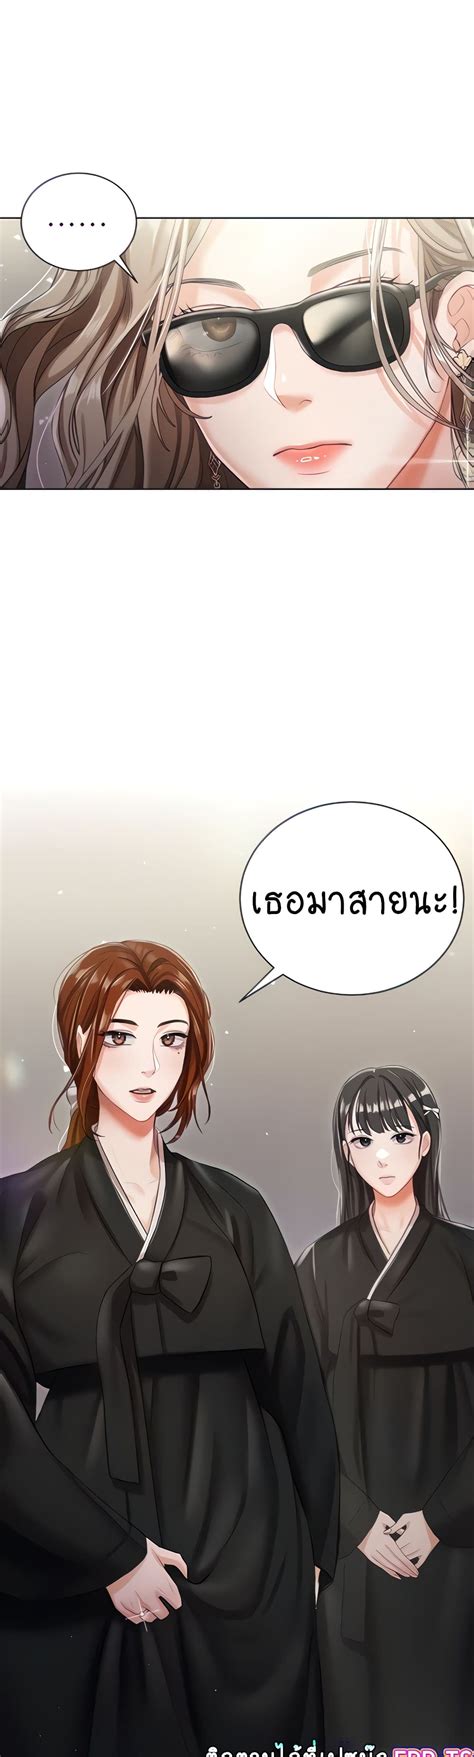 Hyeonjung’s residence raw 39  Click in Hyeonjung’s Residence - english, click on the image to go to the next chapter or previous chapter "single page mode"